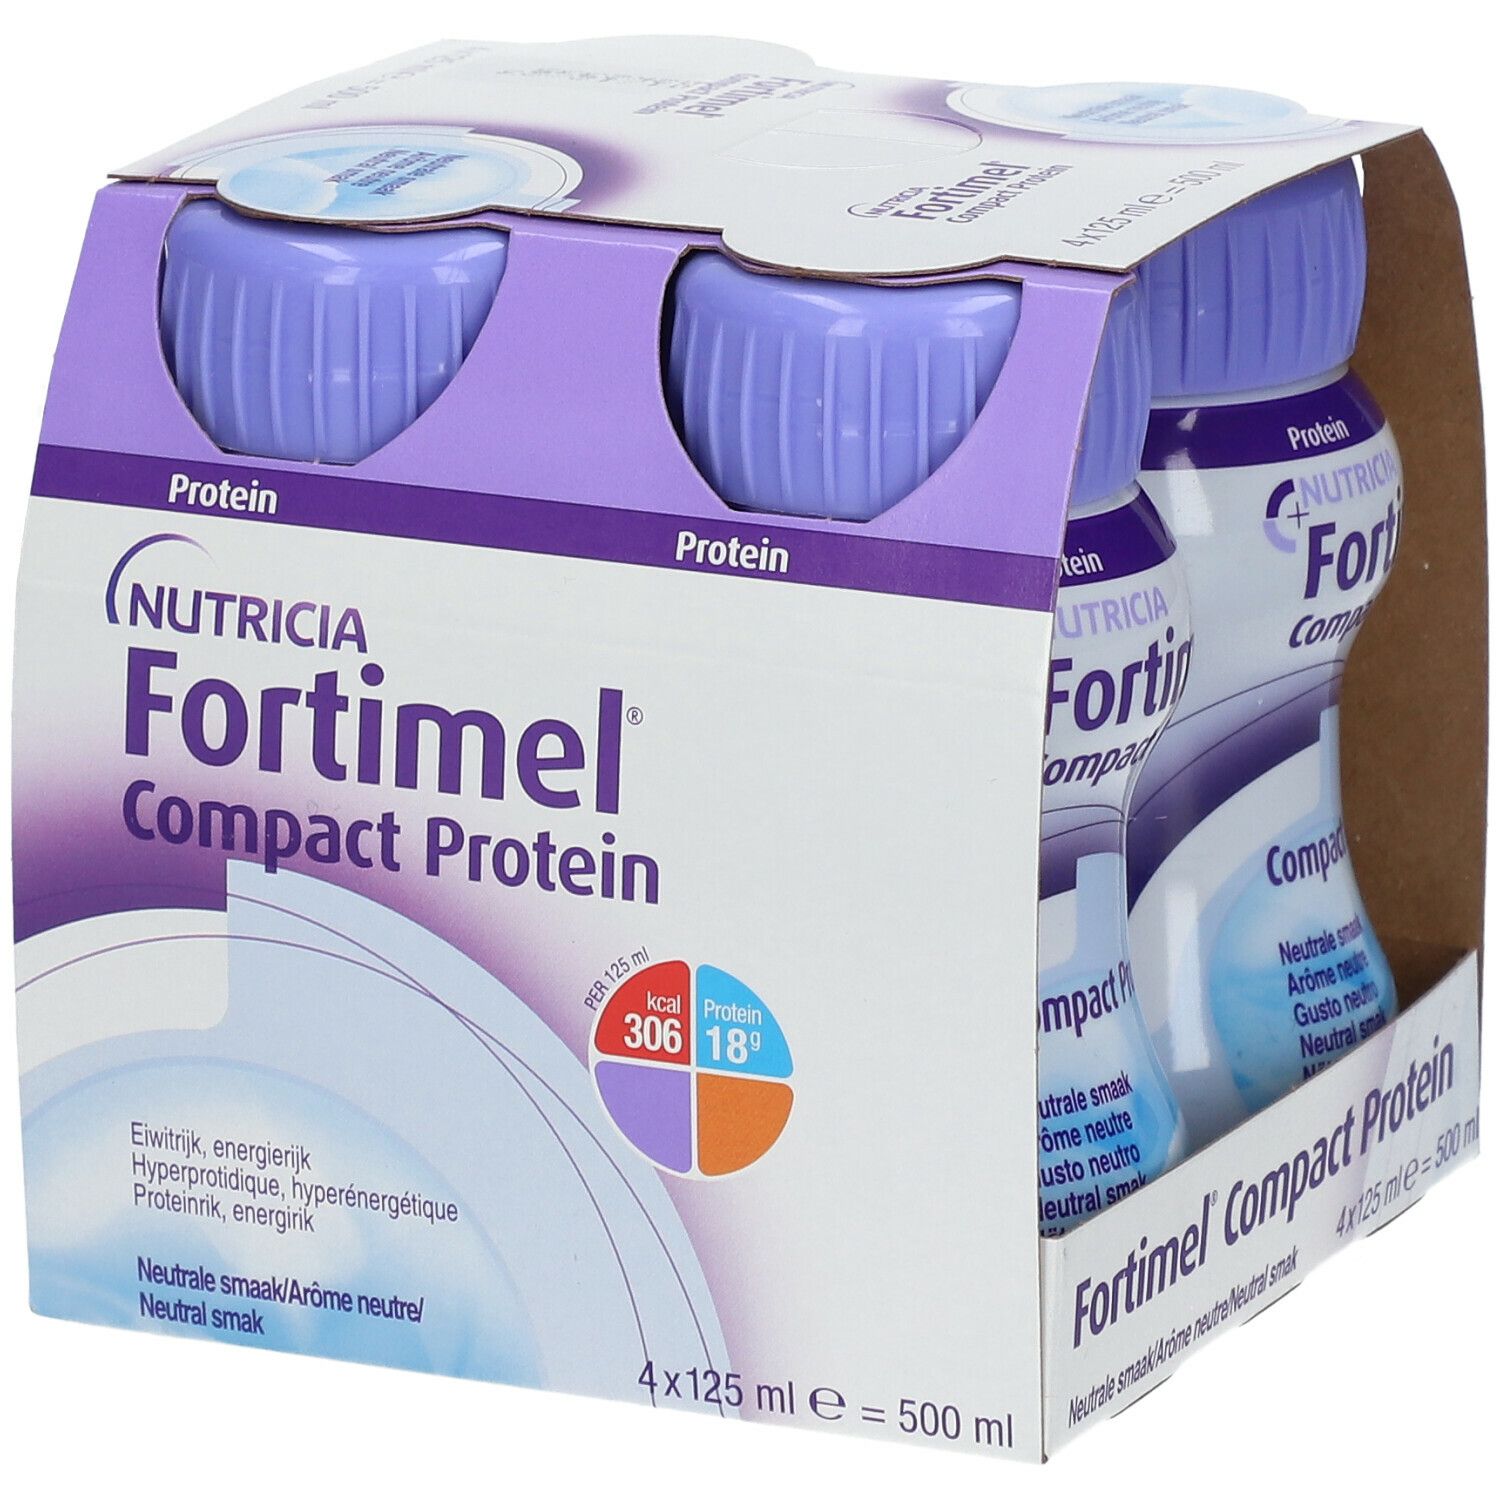 Fortimel Compact Protein Neutrale Smaak